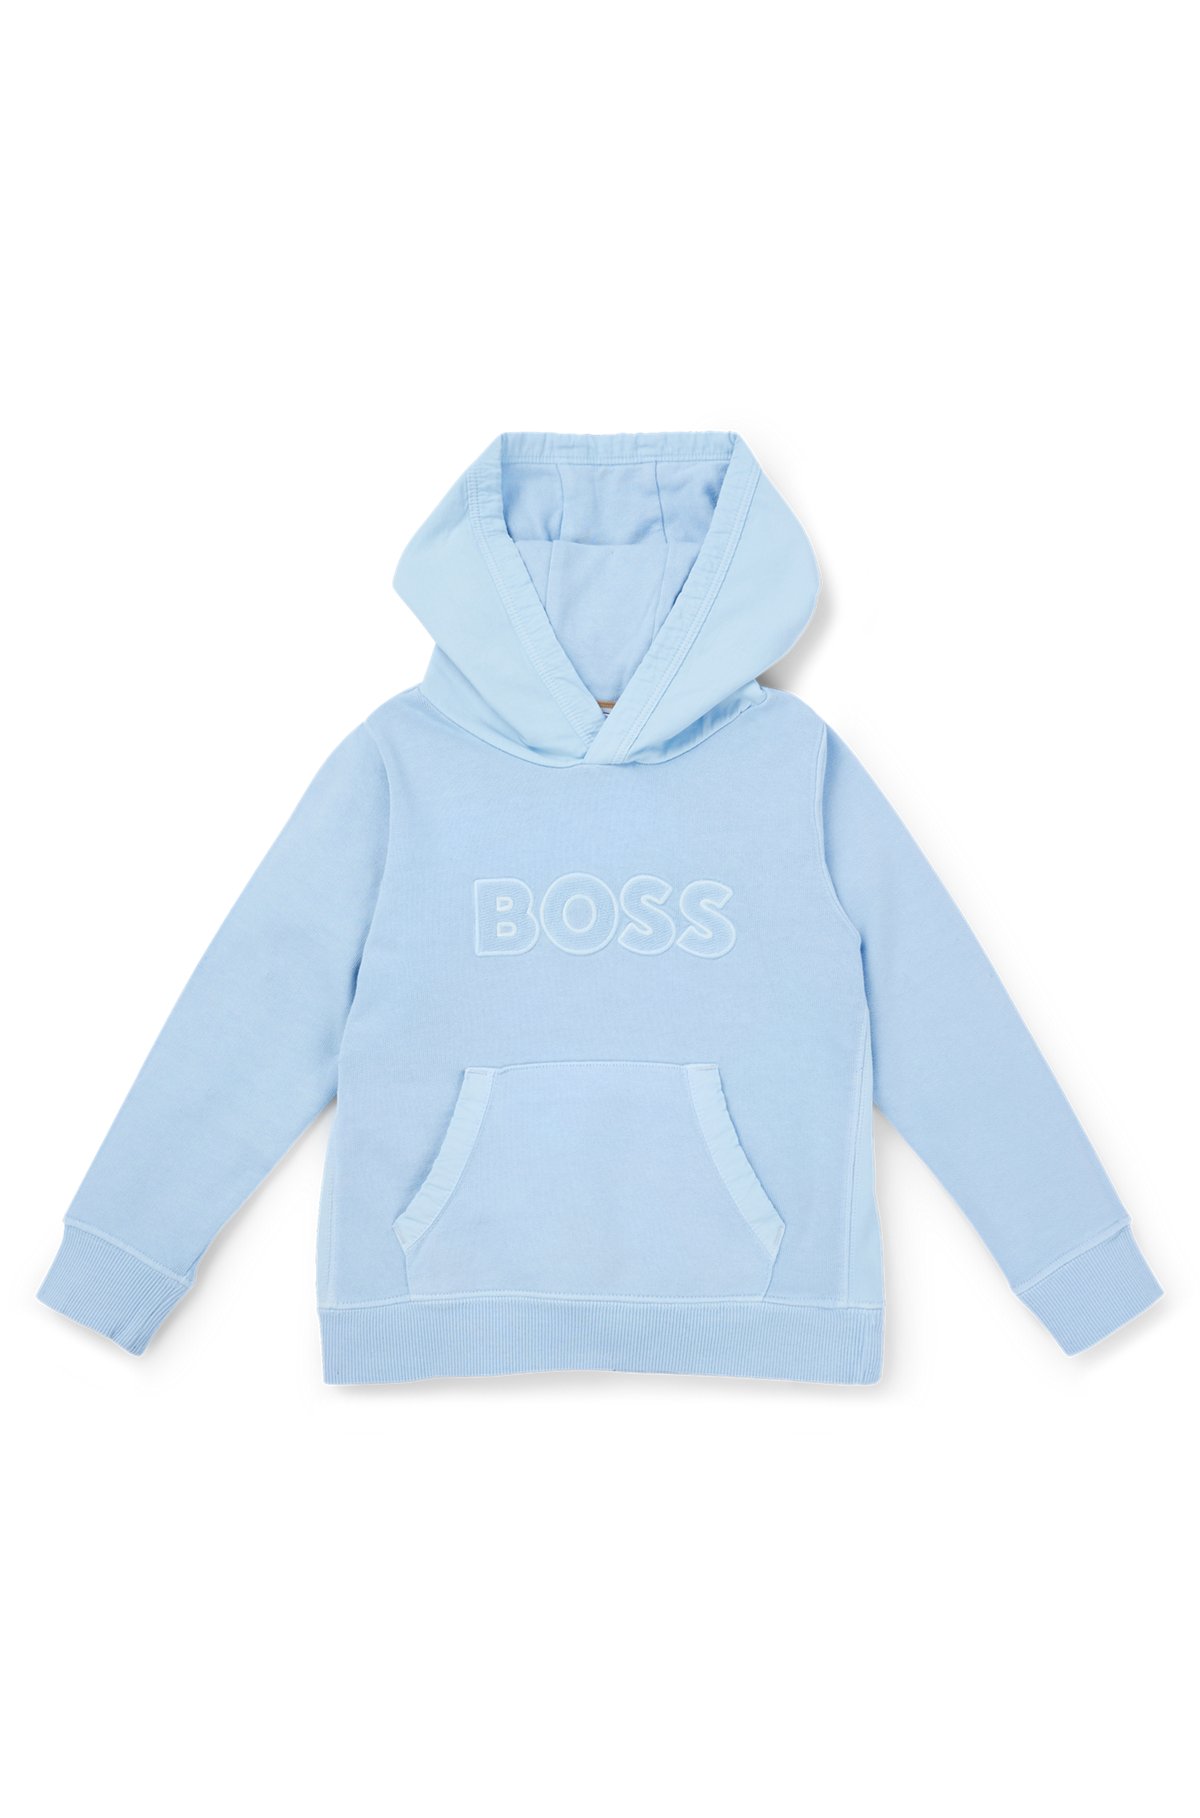 Kids' hoodie in French terry with logo print, Light Blue